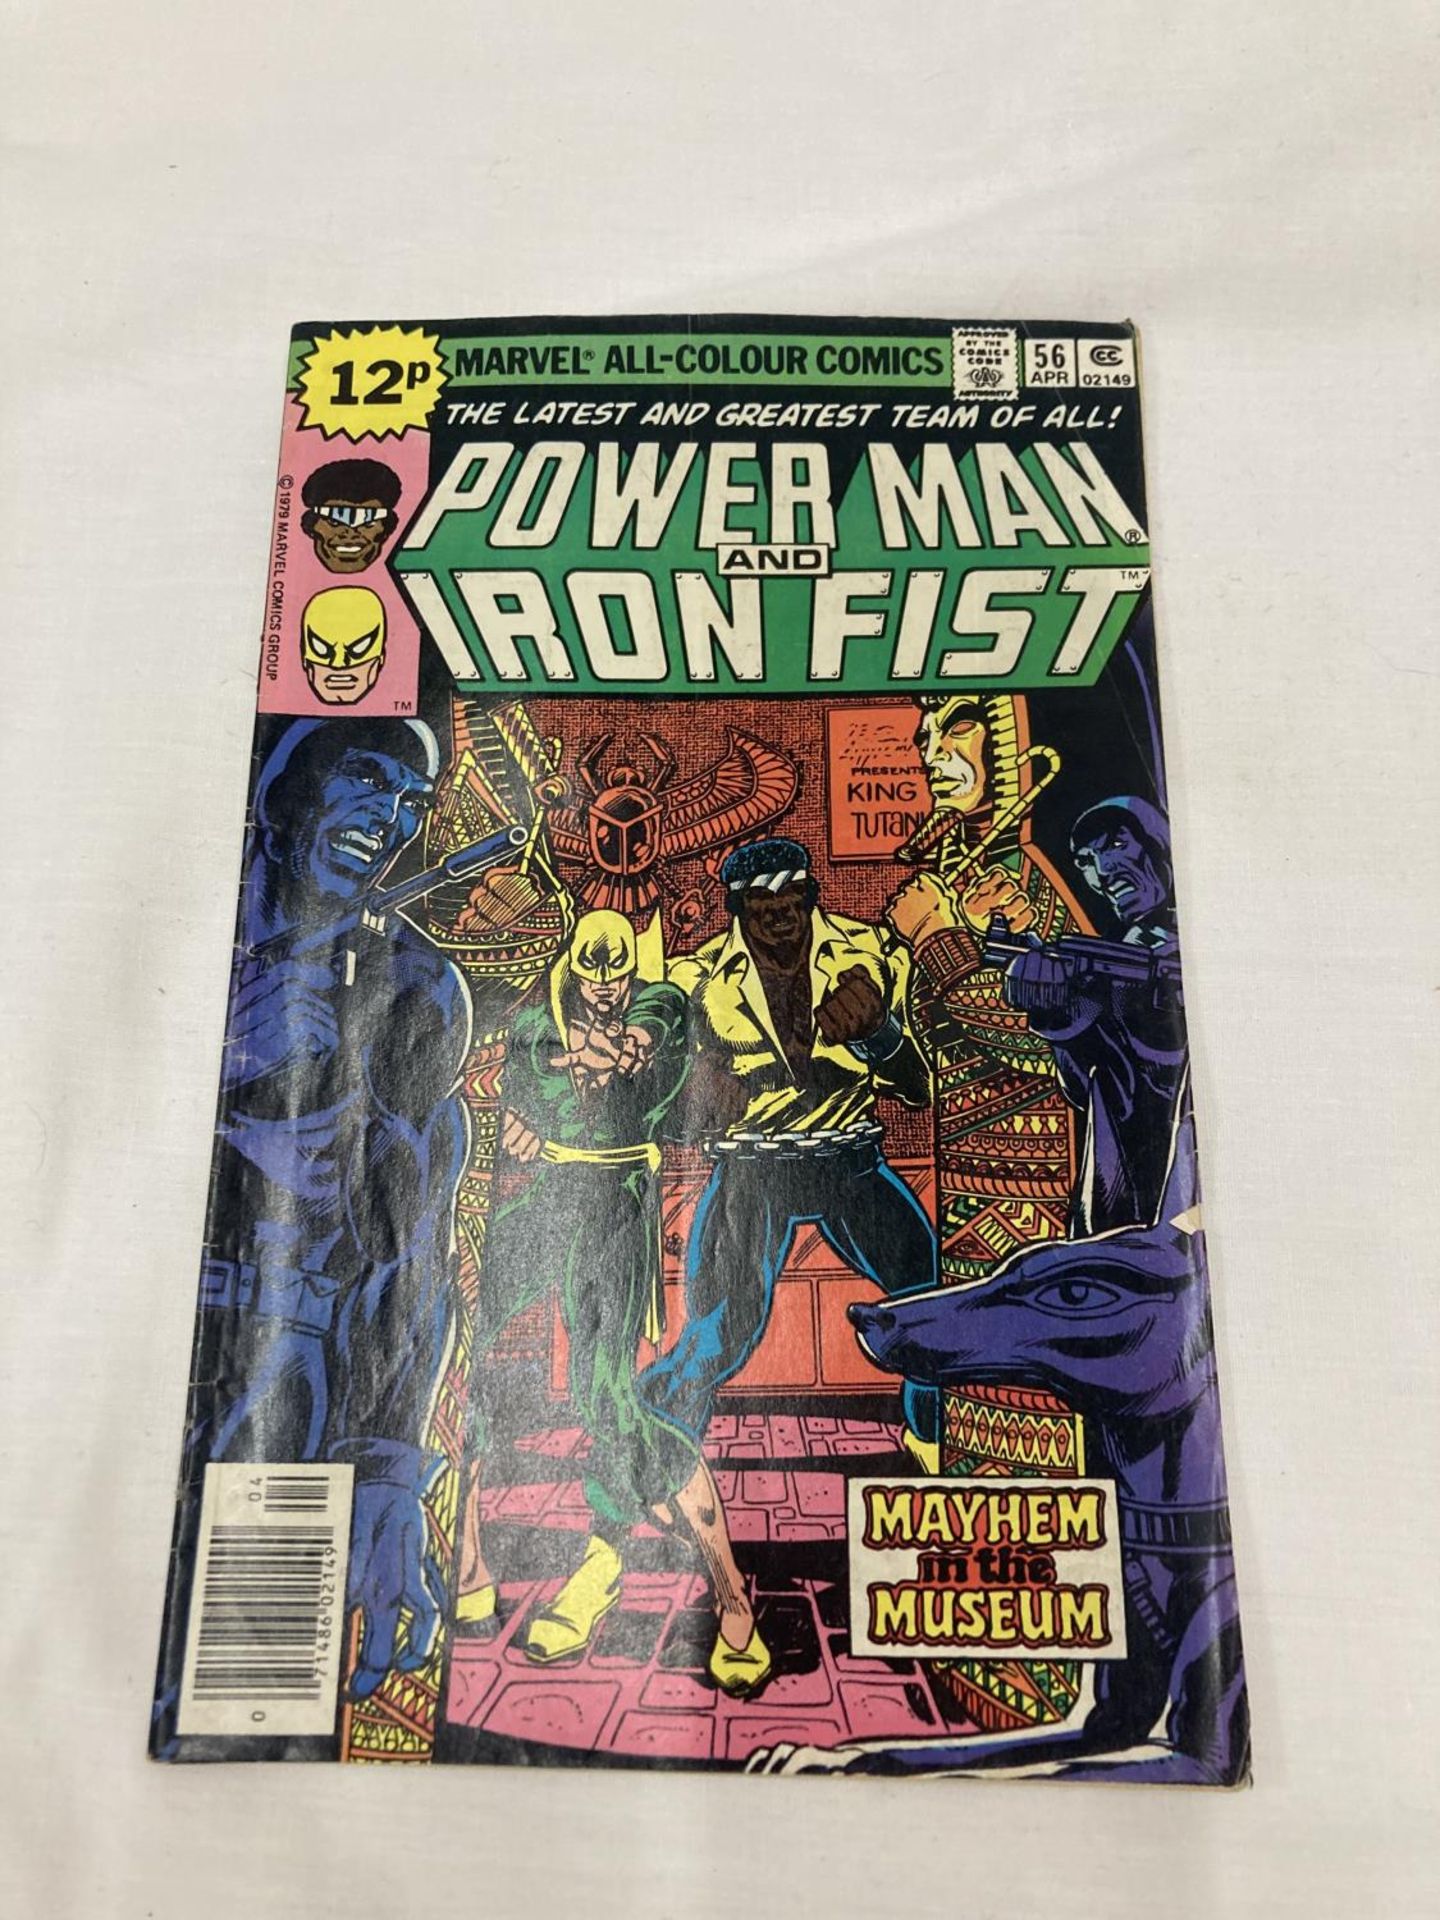 FIVE VINTAGE MARVEL POWERMAN AND IRON FISH COMICS FROM THE 1970'S - Image 12 of 14